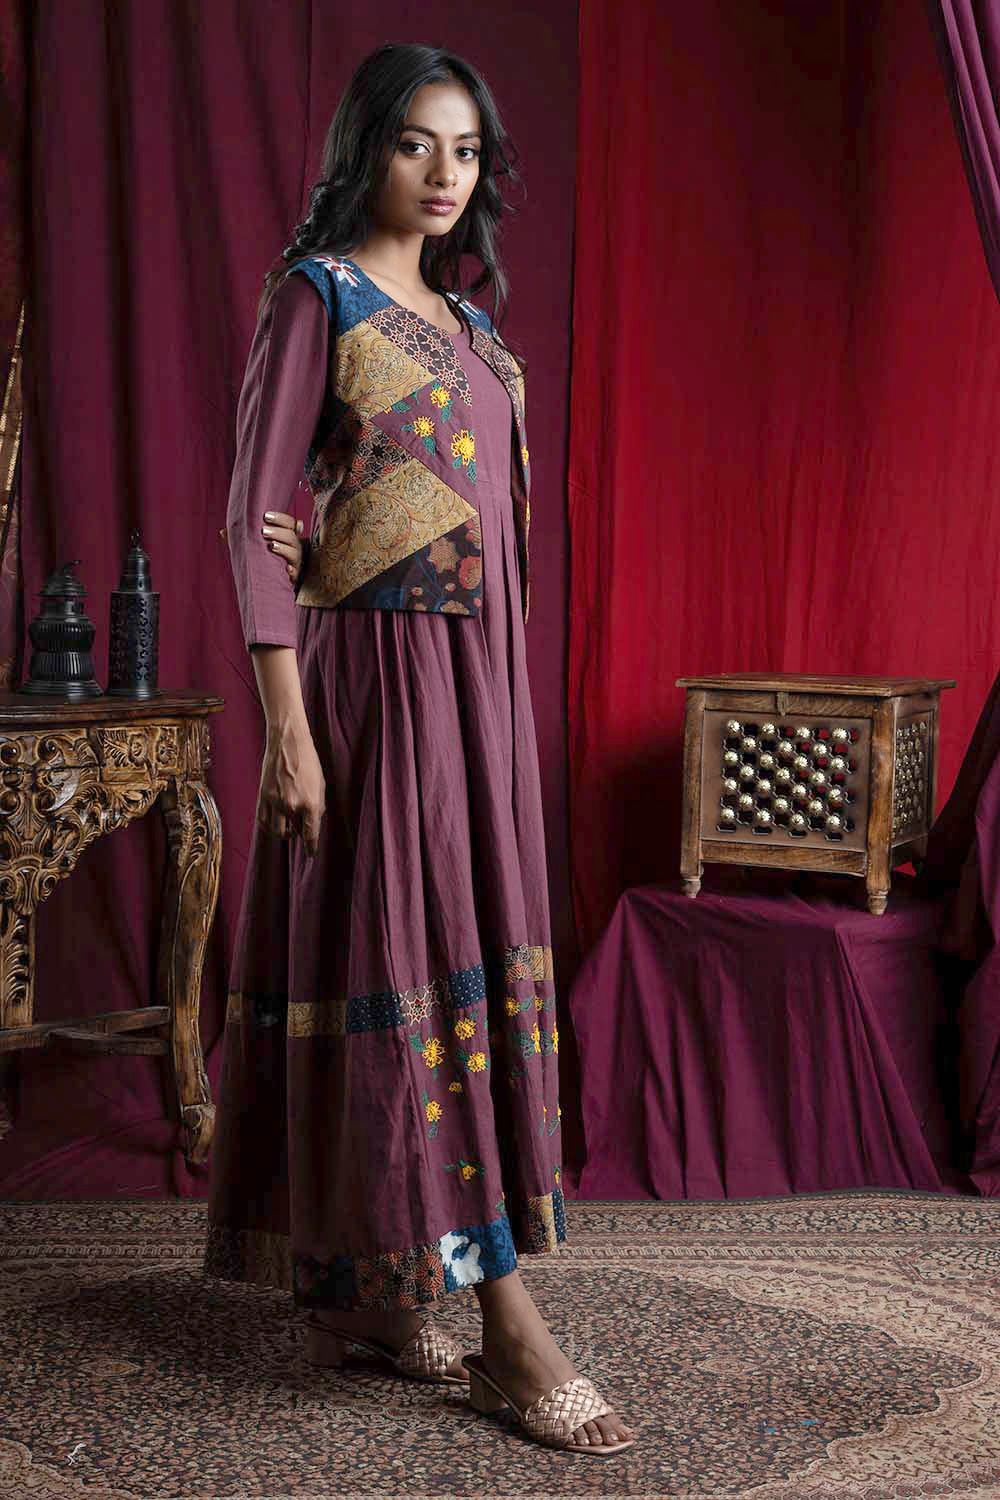 manali dress in winter Free shipping COD available